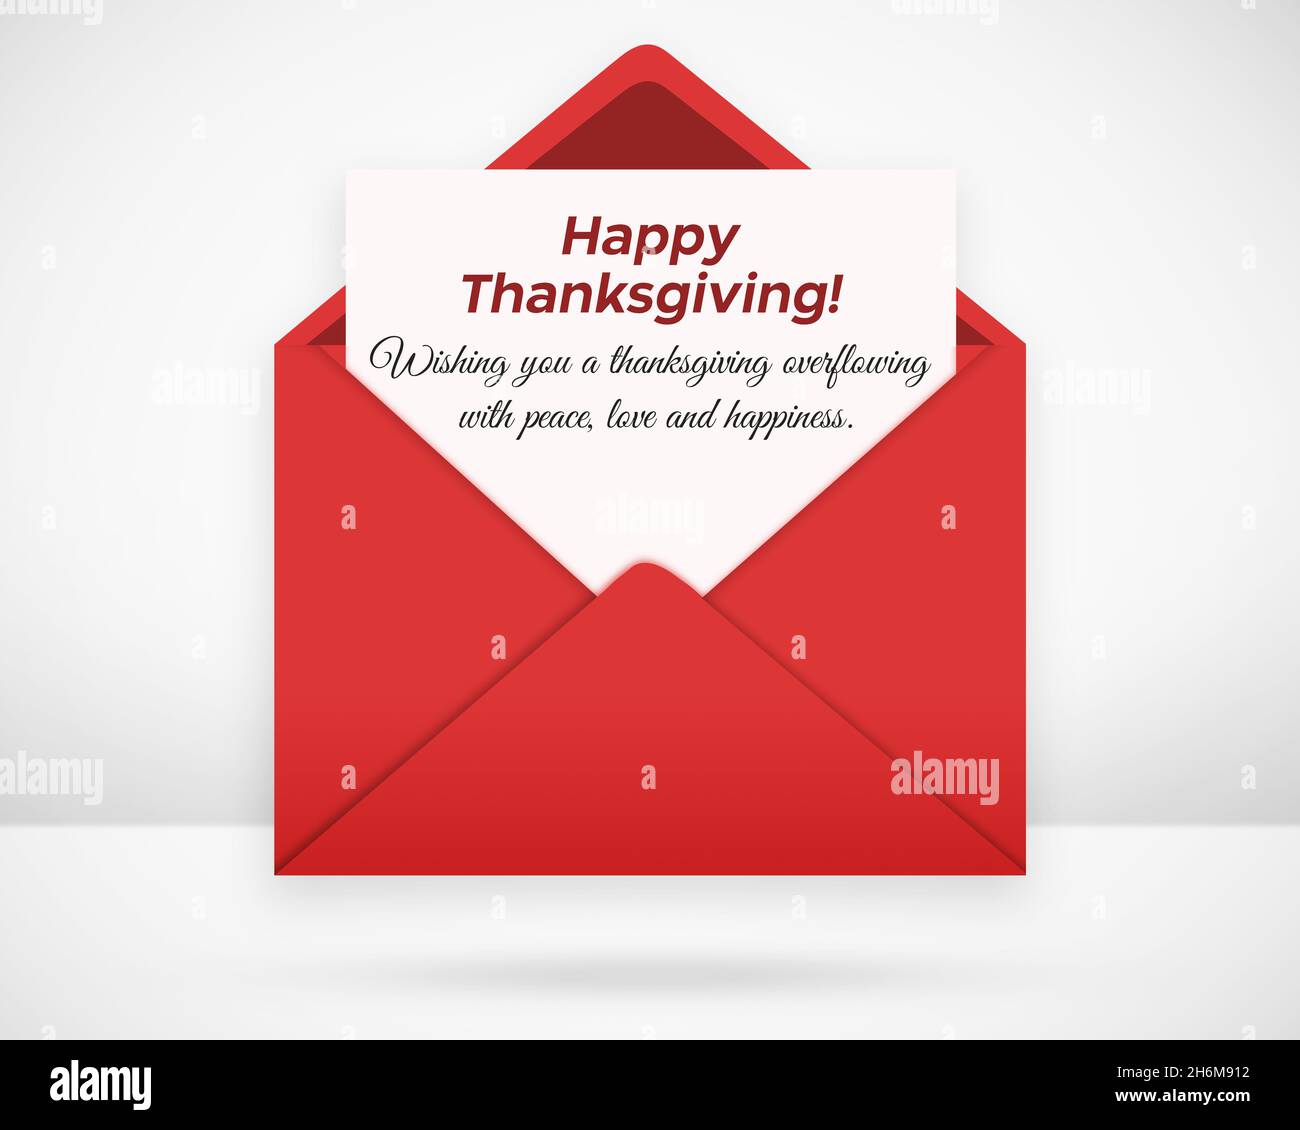 Happy Thanksgiving Letter with Beautiful Greetings and Wishes. Festival background Stock Photo